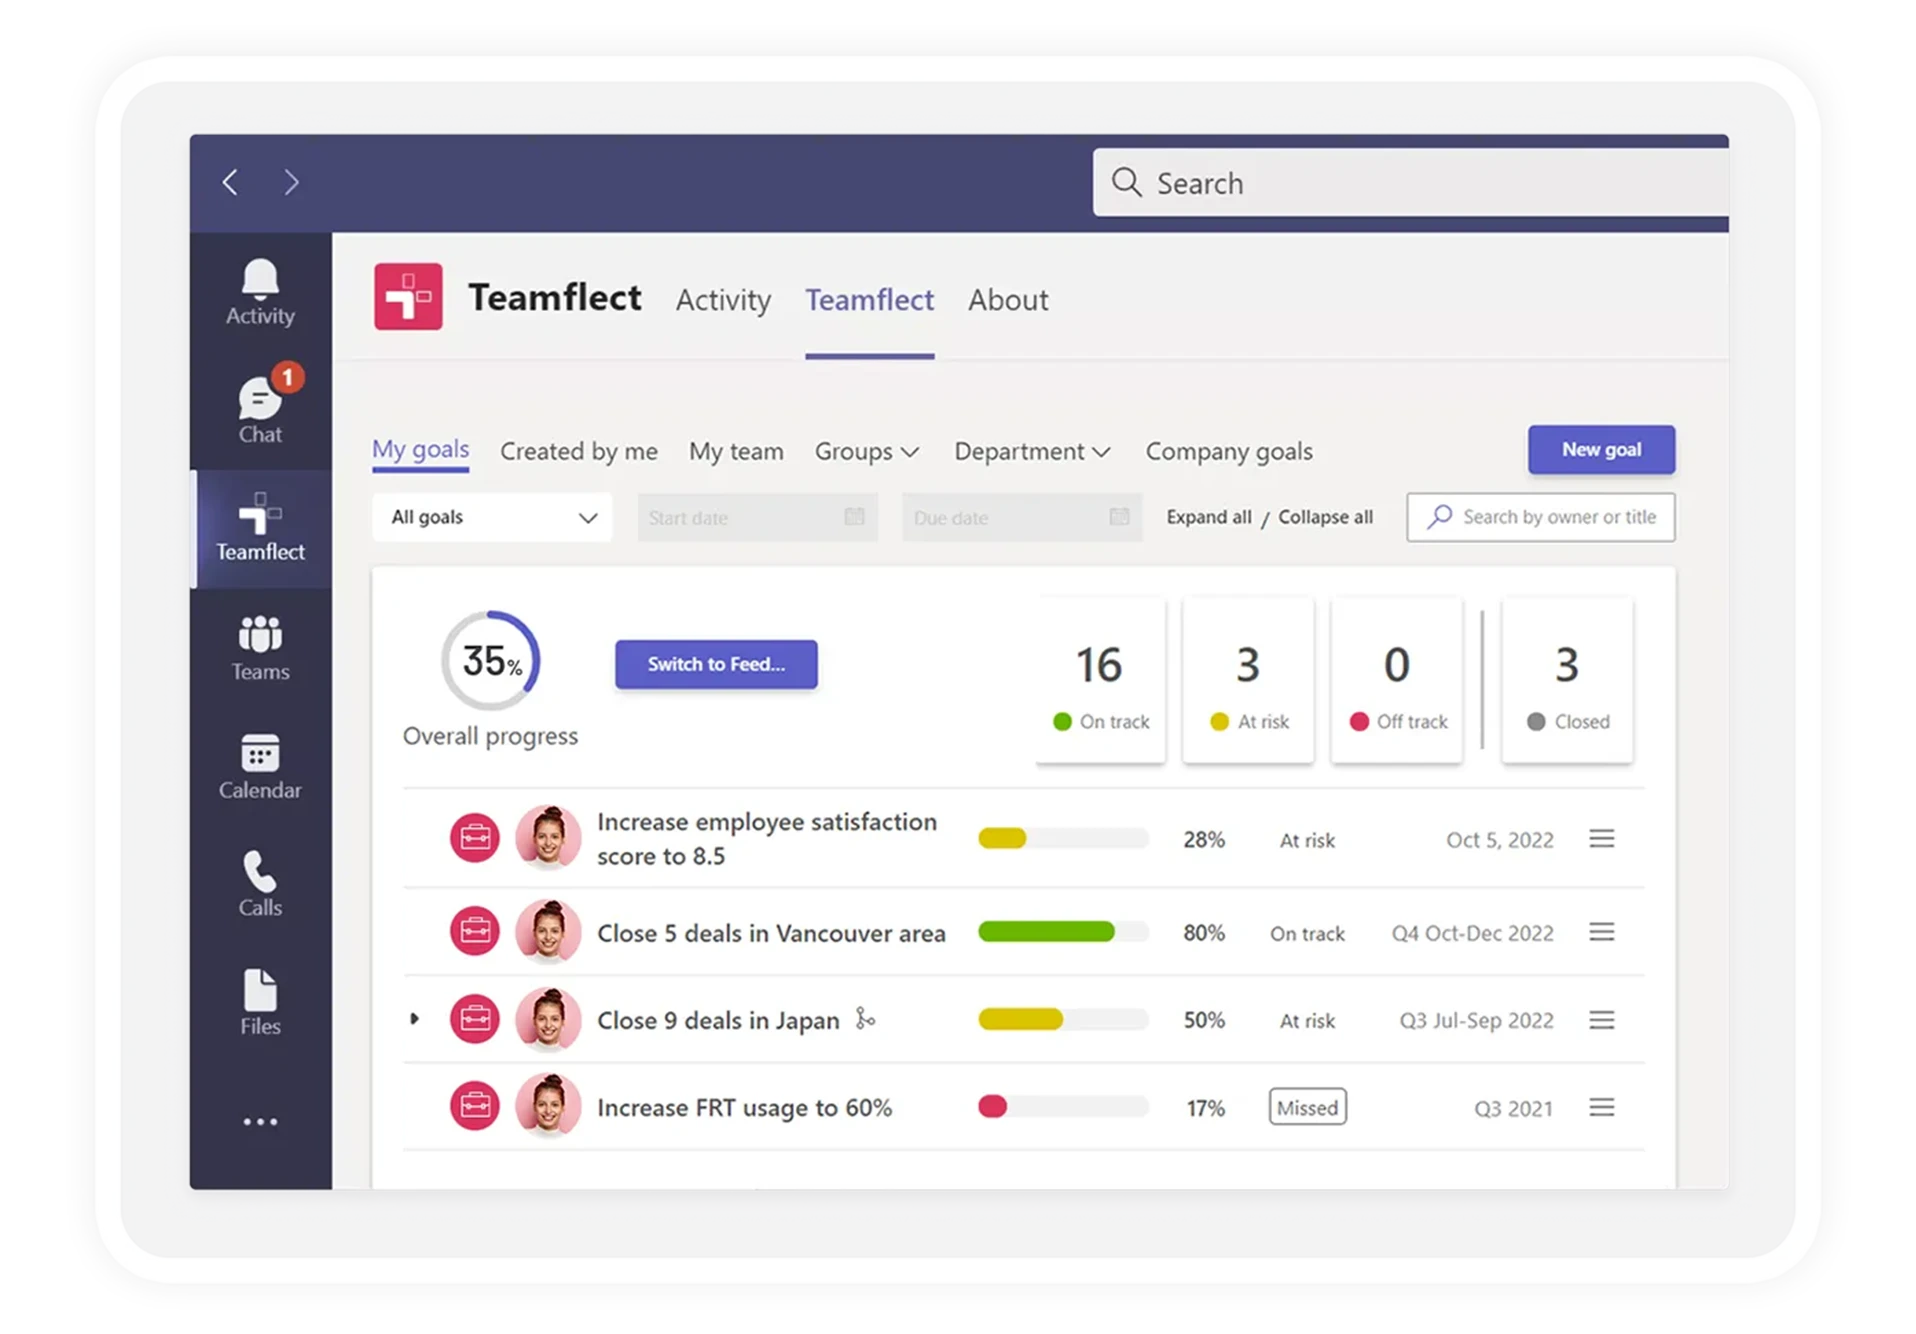 Goal completion is one of the most important employee performance metrics. This is a display of the Teamflect goals module.